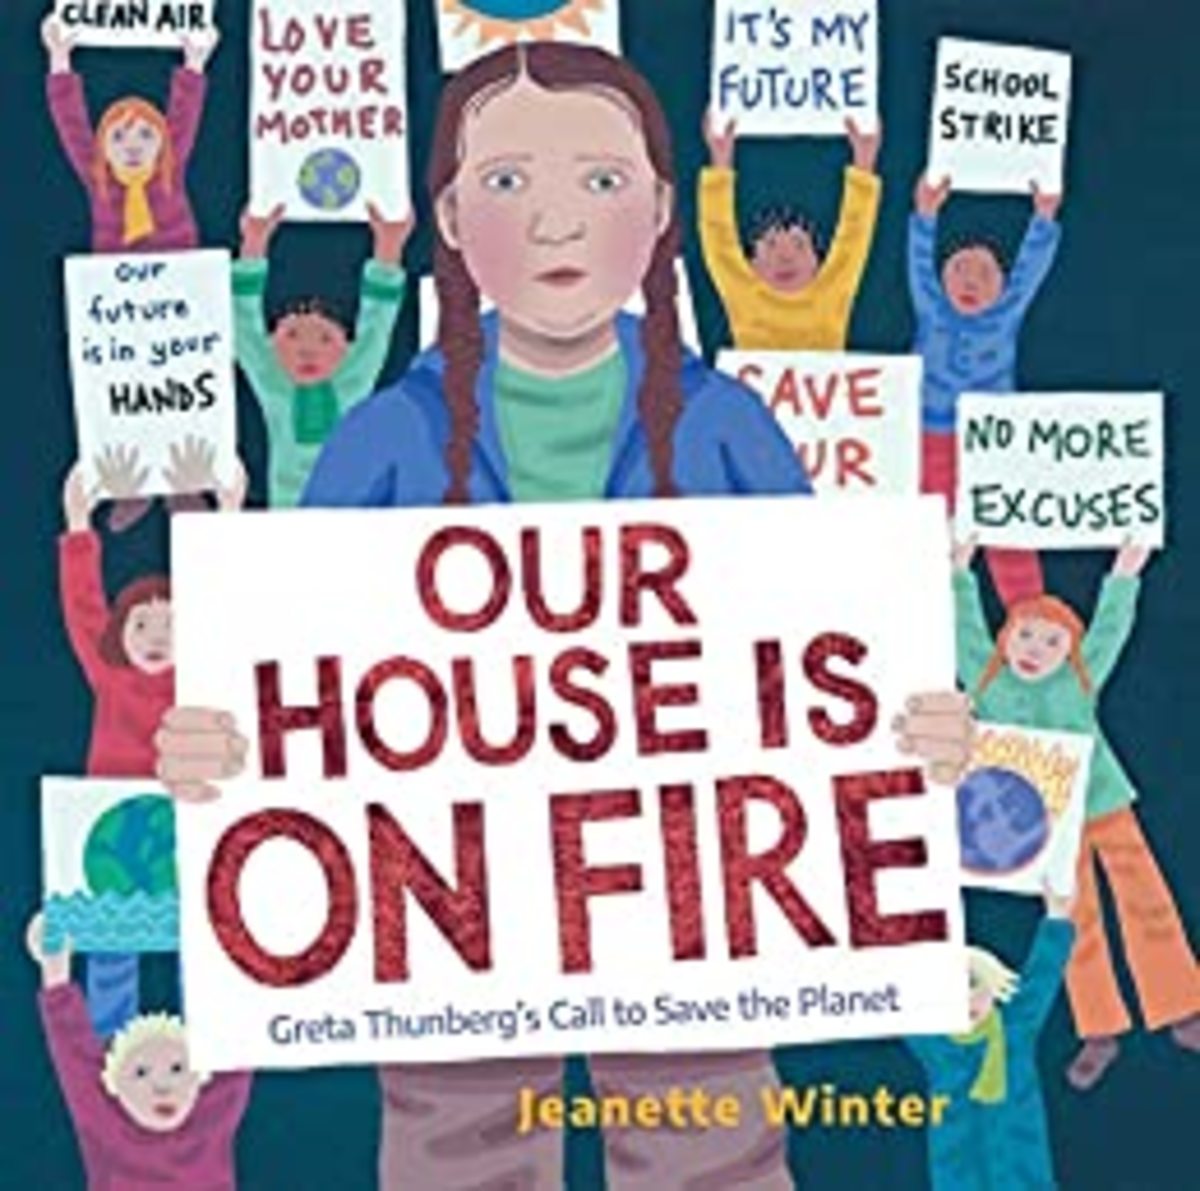 Our House is on Fire: Greta Thunberg’s Call to Save the Planet by Jeanette Winter